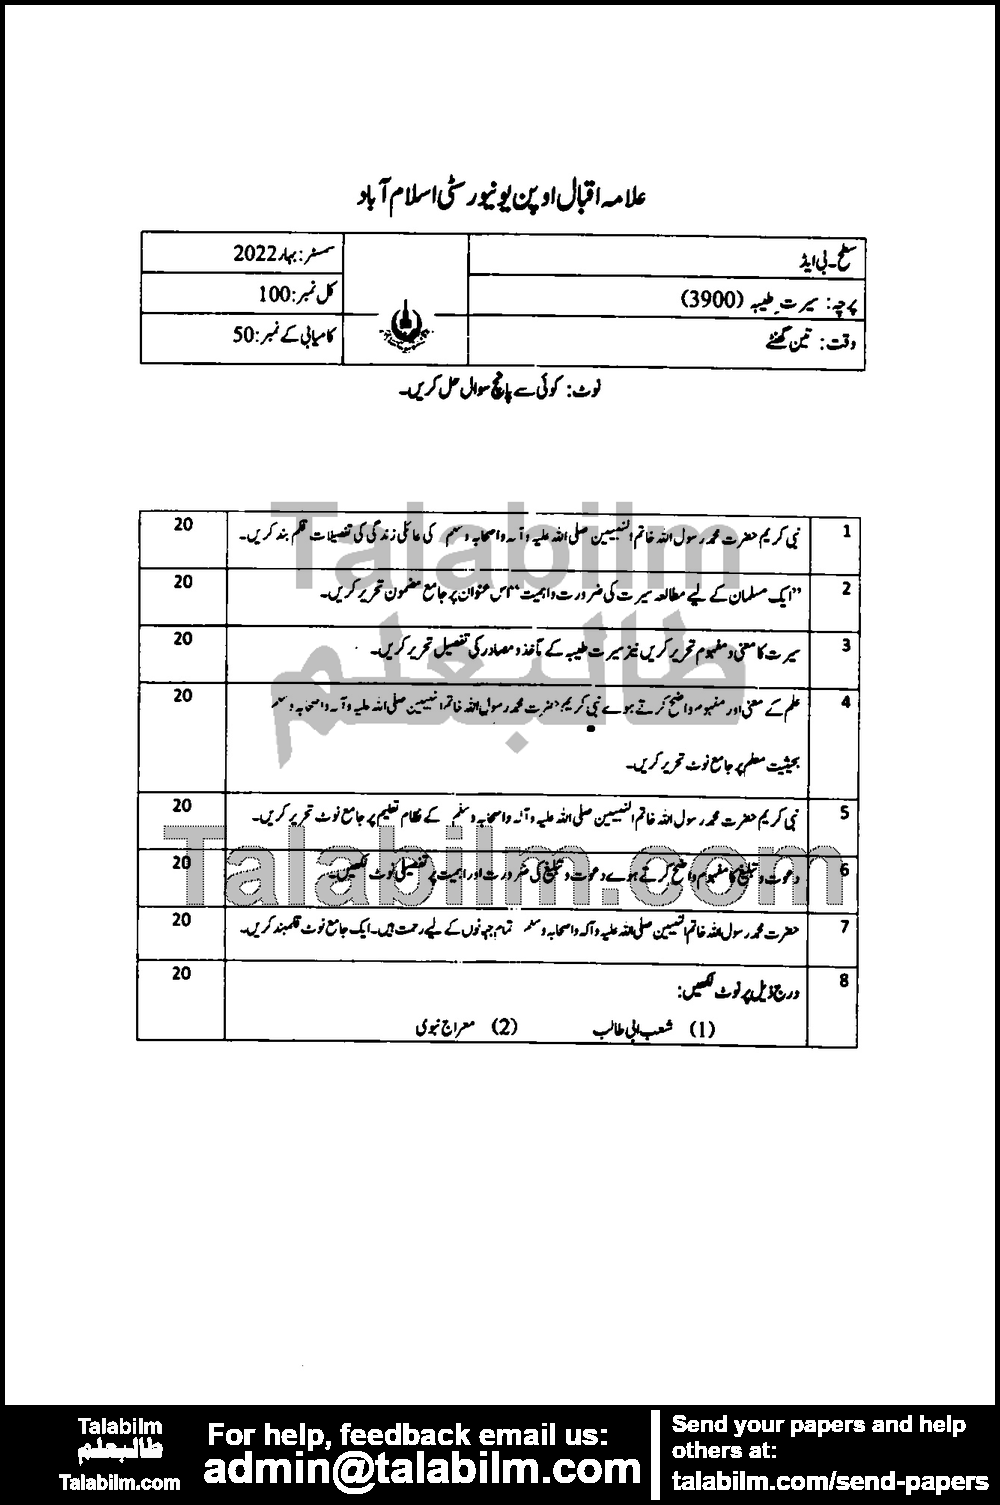 Seerat-e-Tayyaba 3900 past paper for Spring 2022